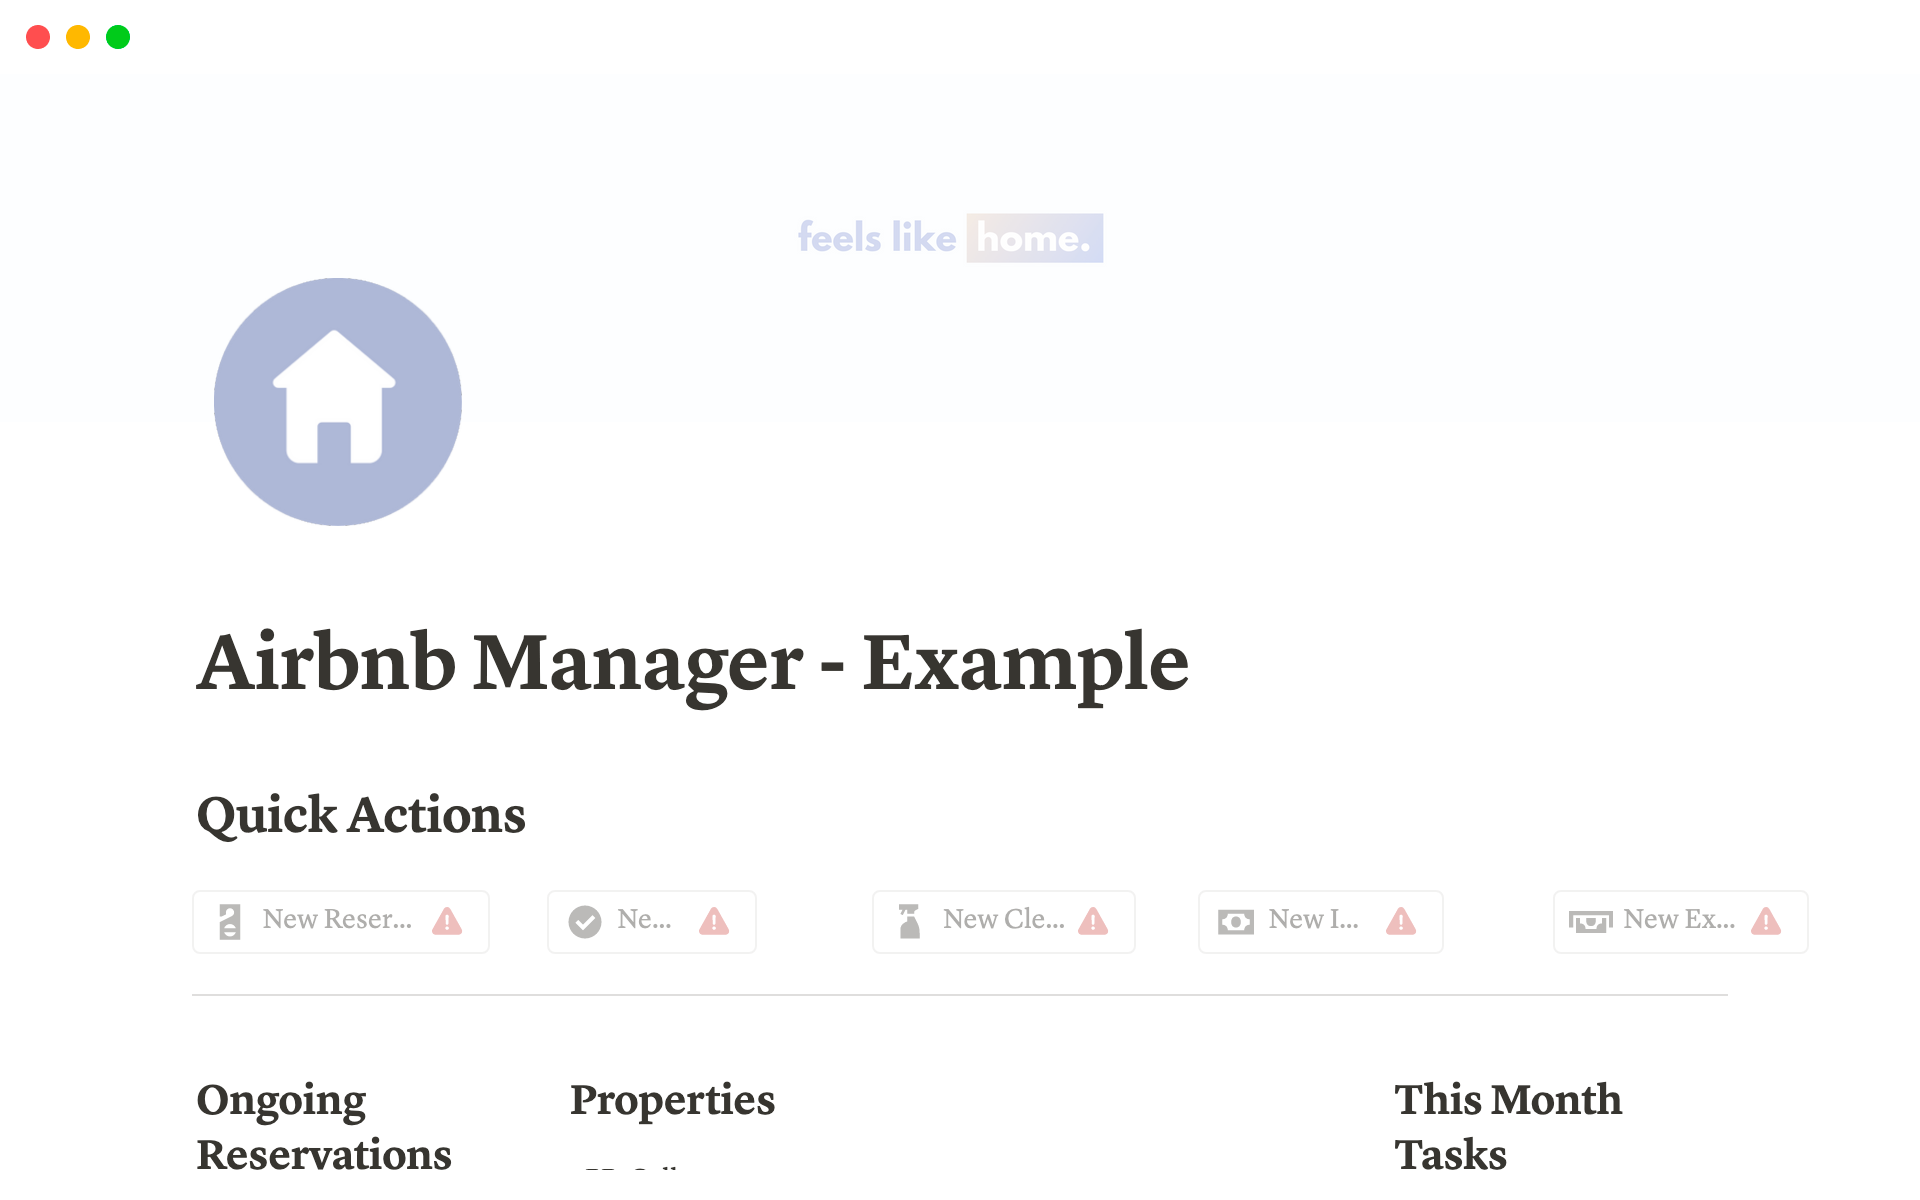 Introducing the Notion Airbnb Manager - a comprehensive, user-friendly tool designed for busy Airbnb hosts and property rental managers.